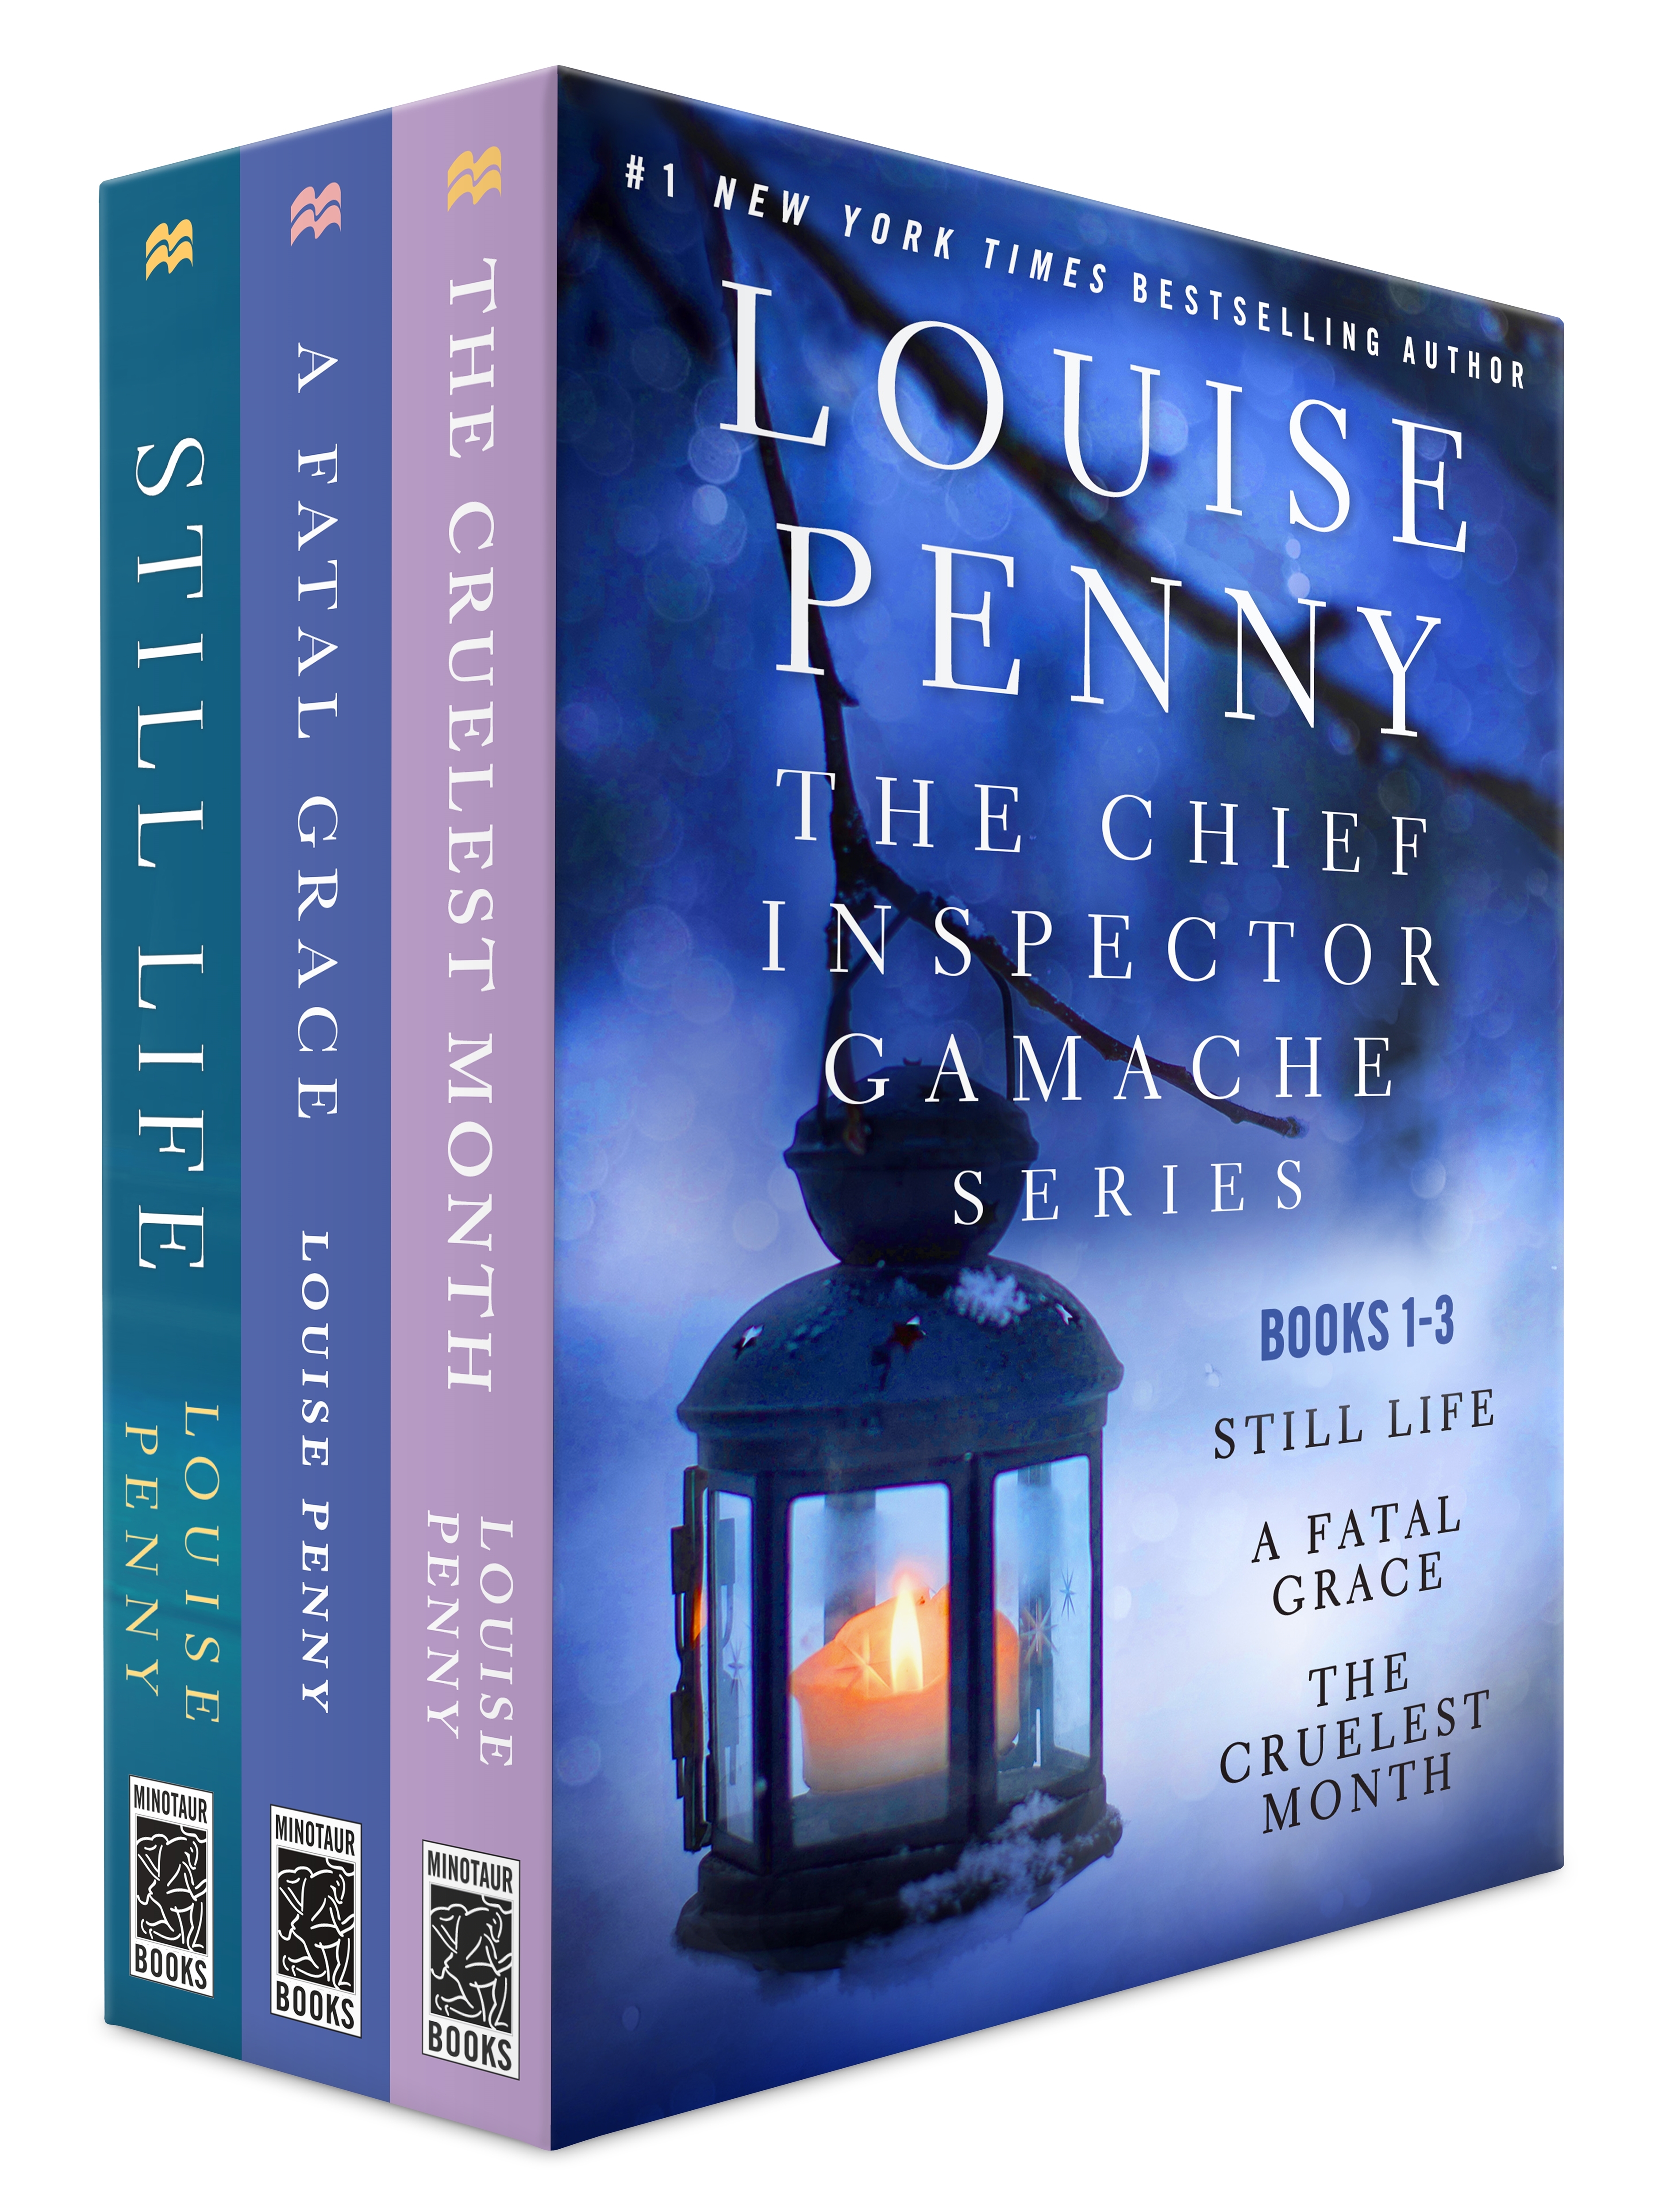 The Chief Inspector Gamache Series, Books 7-9